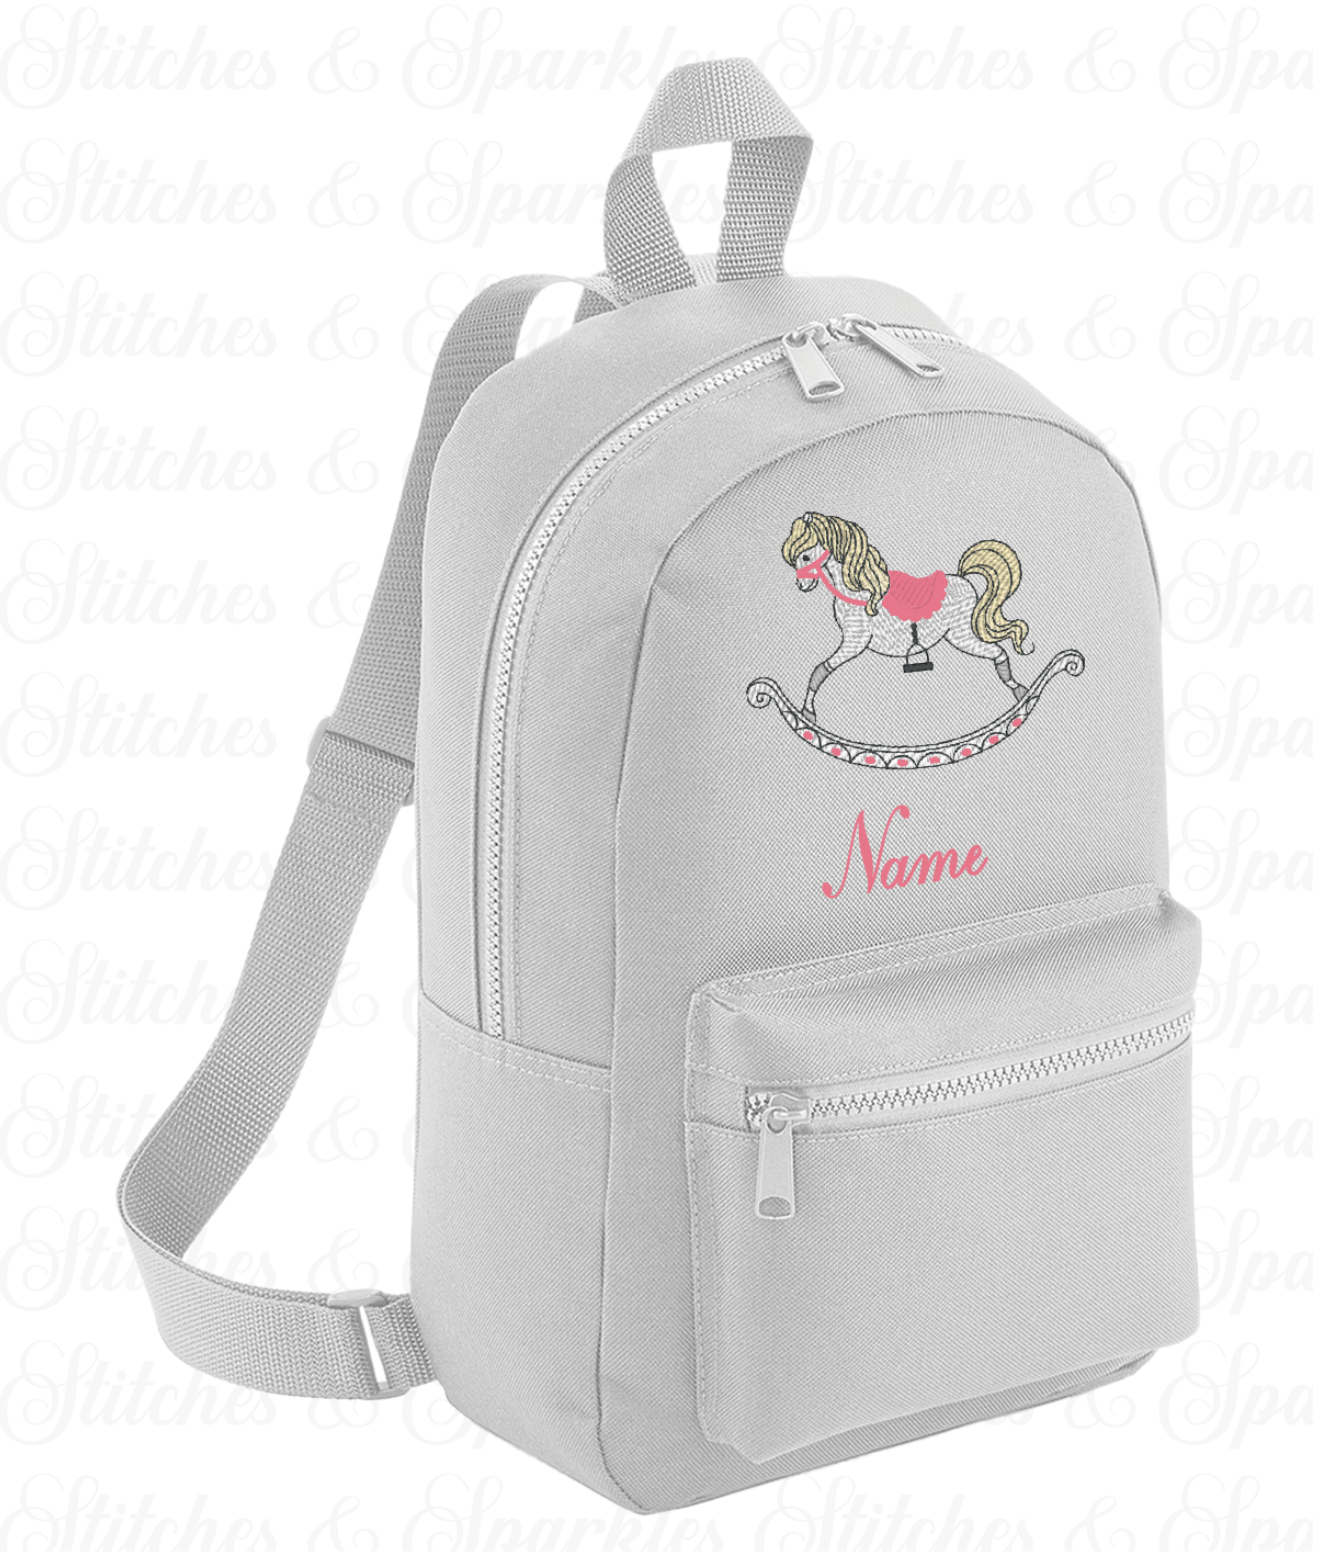 Embroidered Backpack - Toy Horse